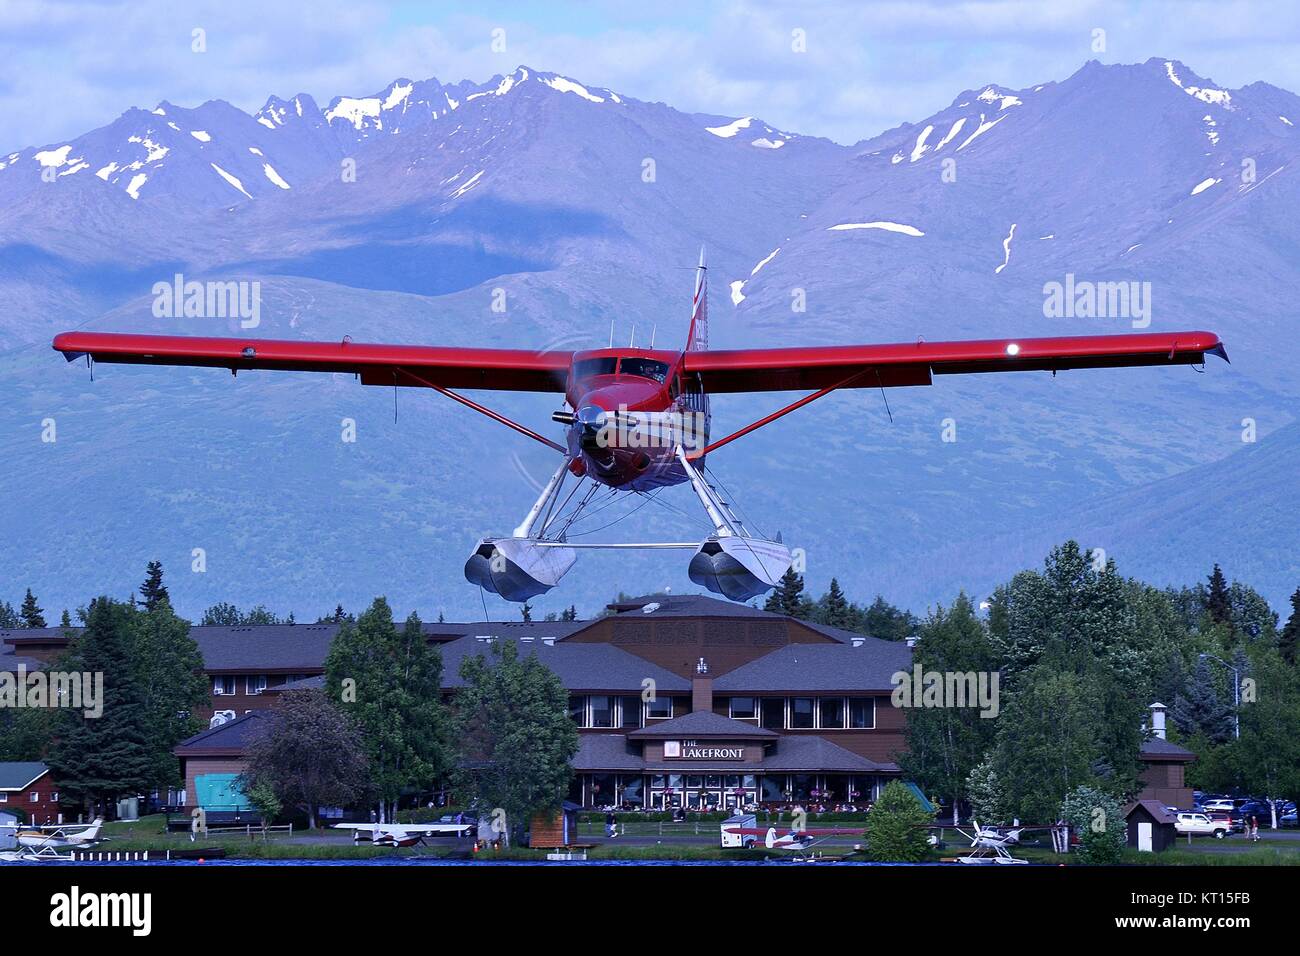 RUST'S FLYING SERVICE DHC-3T TURBO OTTER ABOUT TO LAND ON LAKE HOOD, ALASKA. Stock Photo